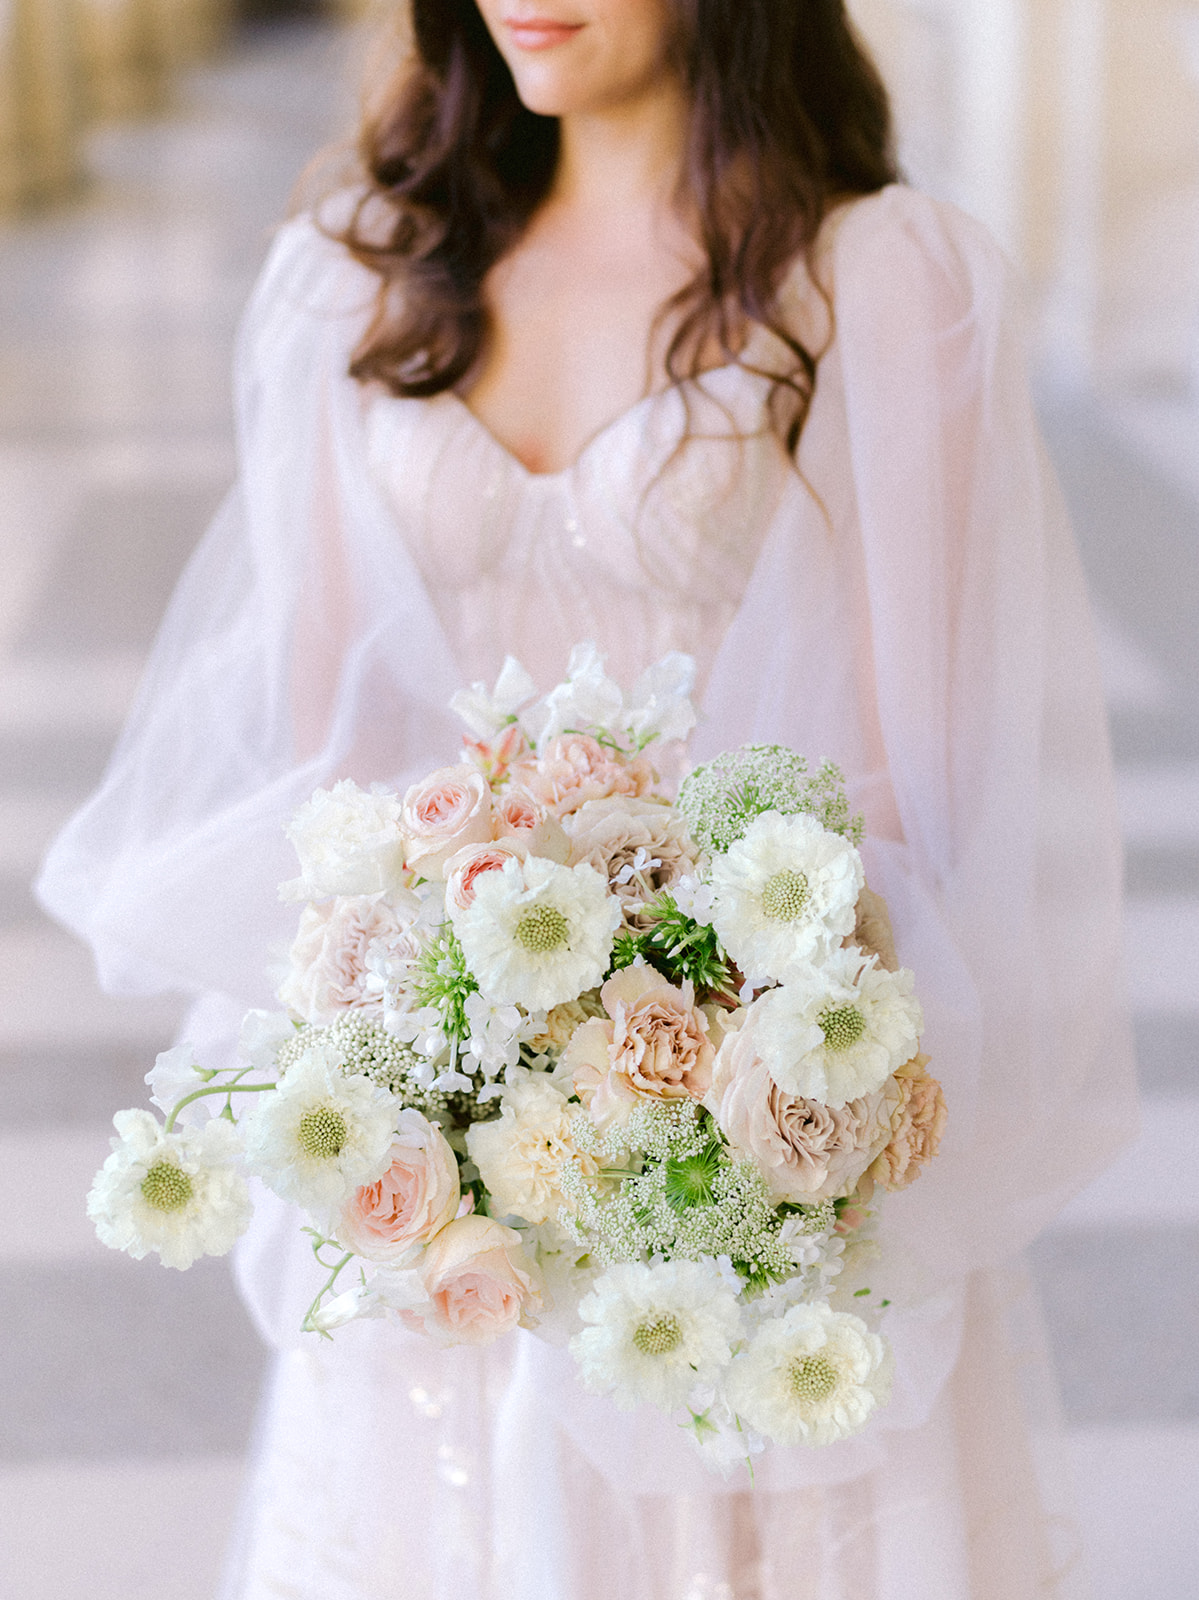 Bride holding a beautiful bouquet of flowers in her hands